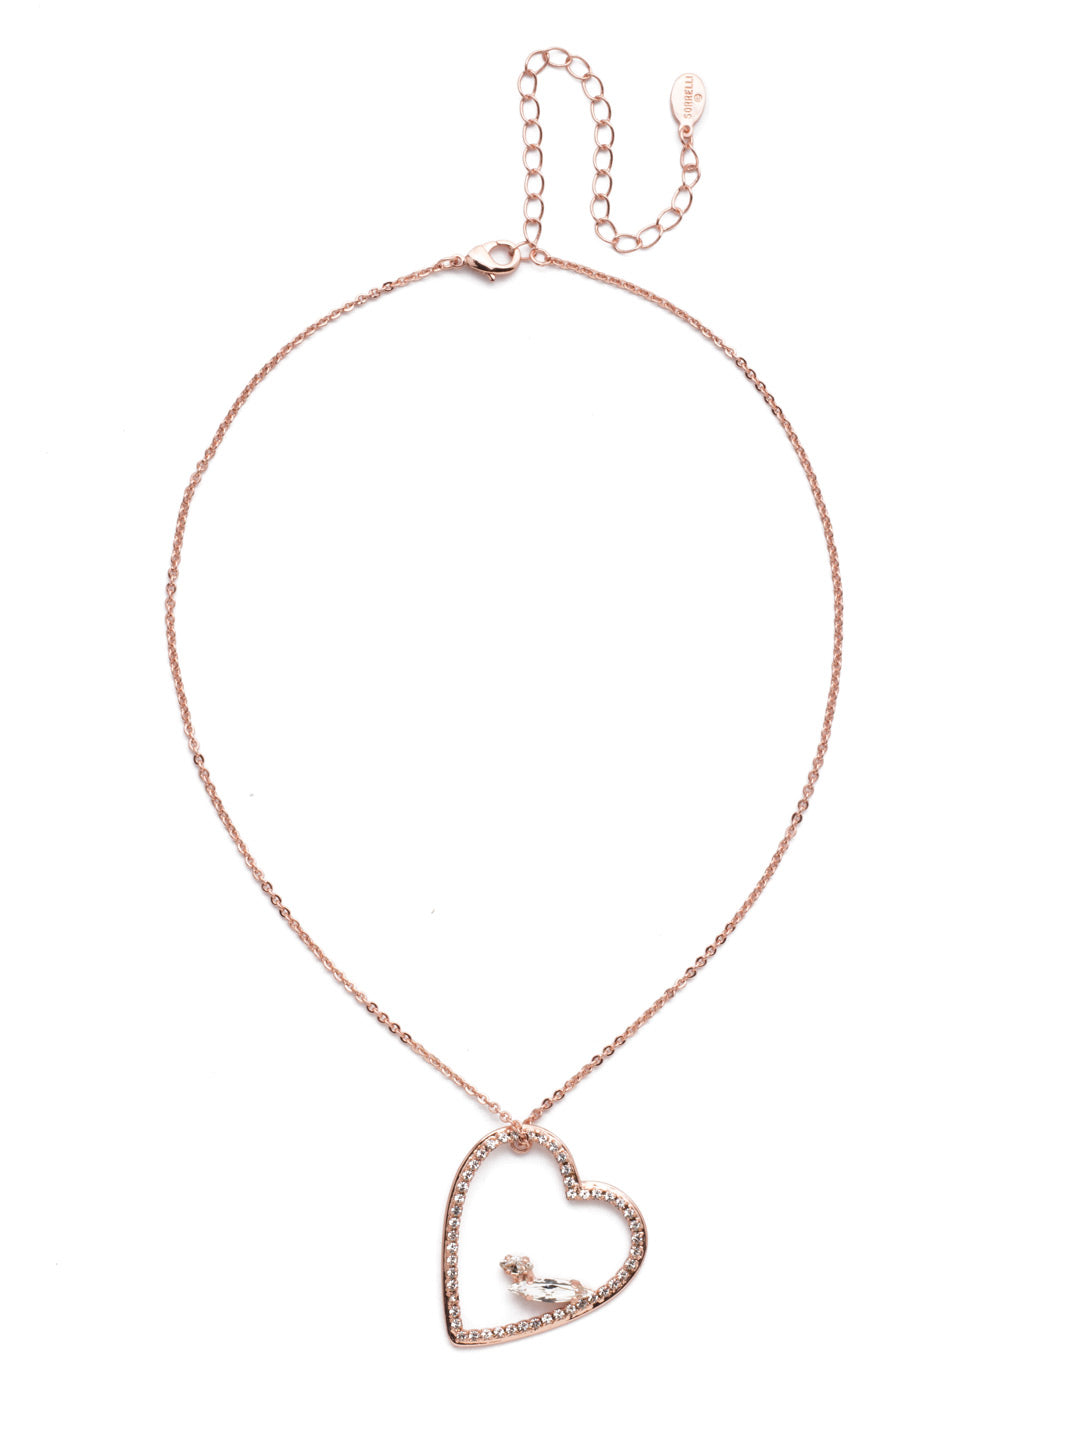 Sarafina Pendant Necklace - NER2RGCRY - <p>We think you'll have big love for the Sarafina Pendant Necklace. The simple metal chain dangles a crystal-encrusted heart with gorgeous navette stones at its center. From Sorrelli's Crystal collection in our Rose Gold-tone finish.</p>